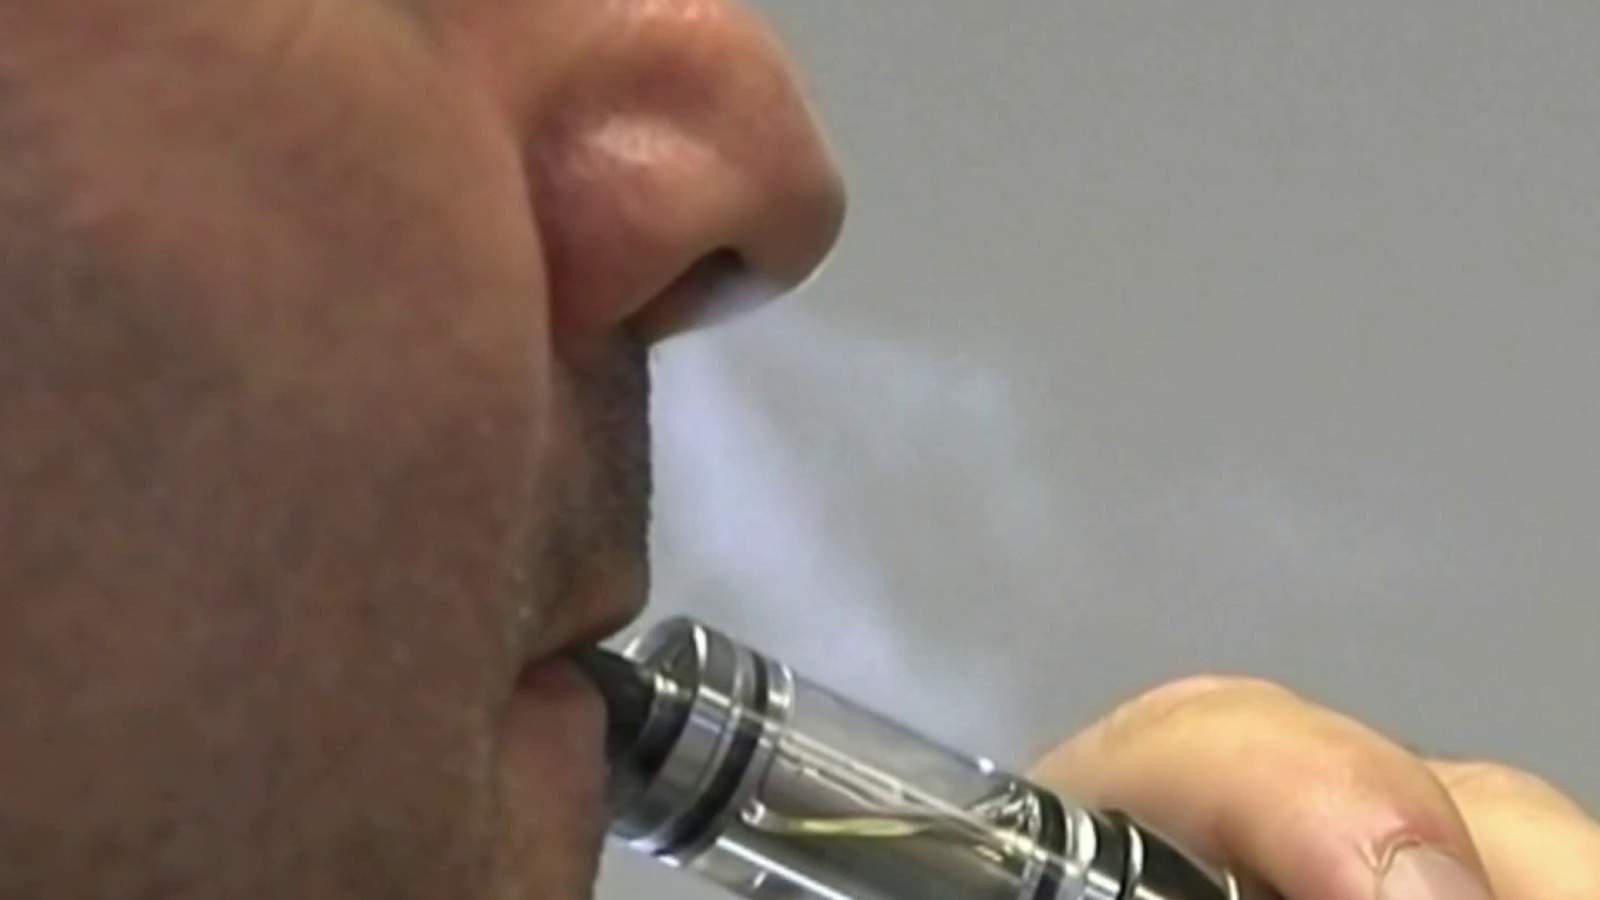 Michigan health officials report fourth death from vaping-related lung injury